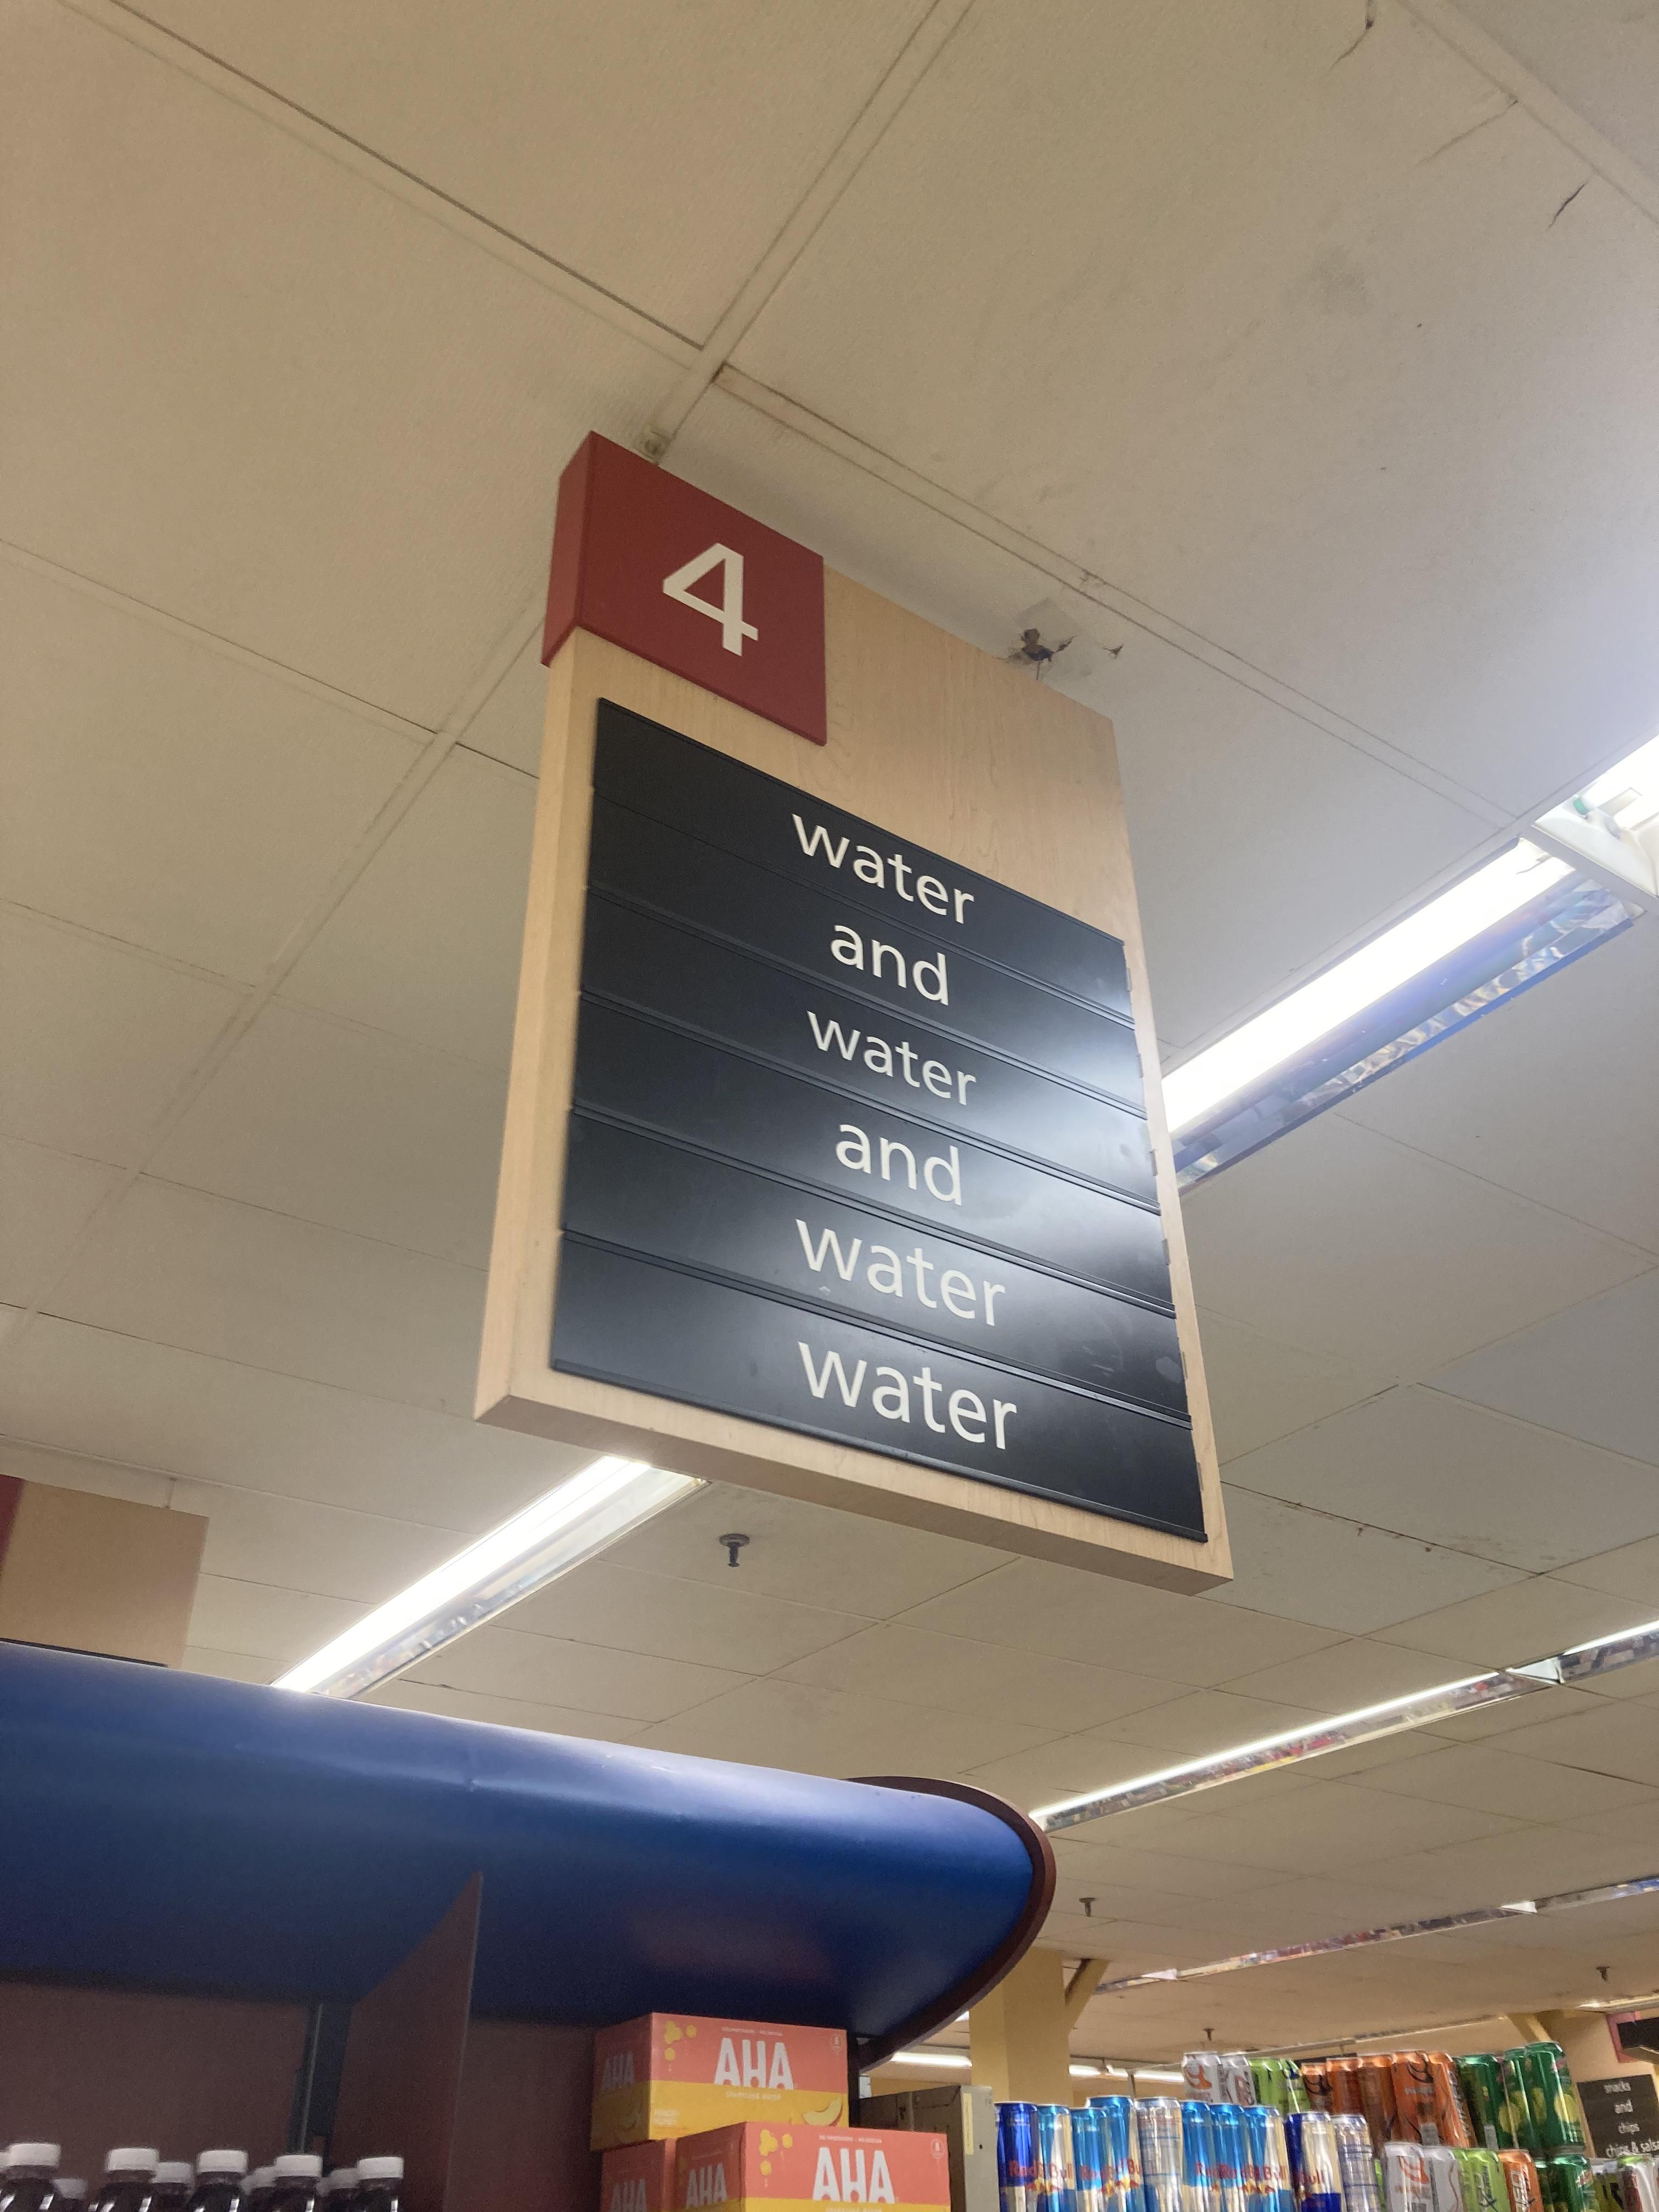 This isle in Safeway